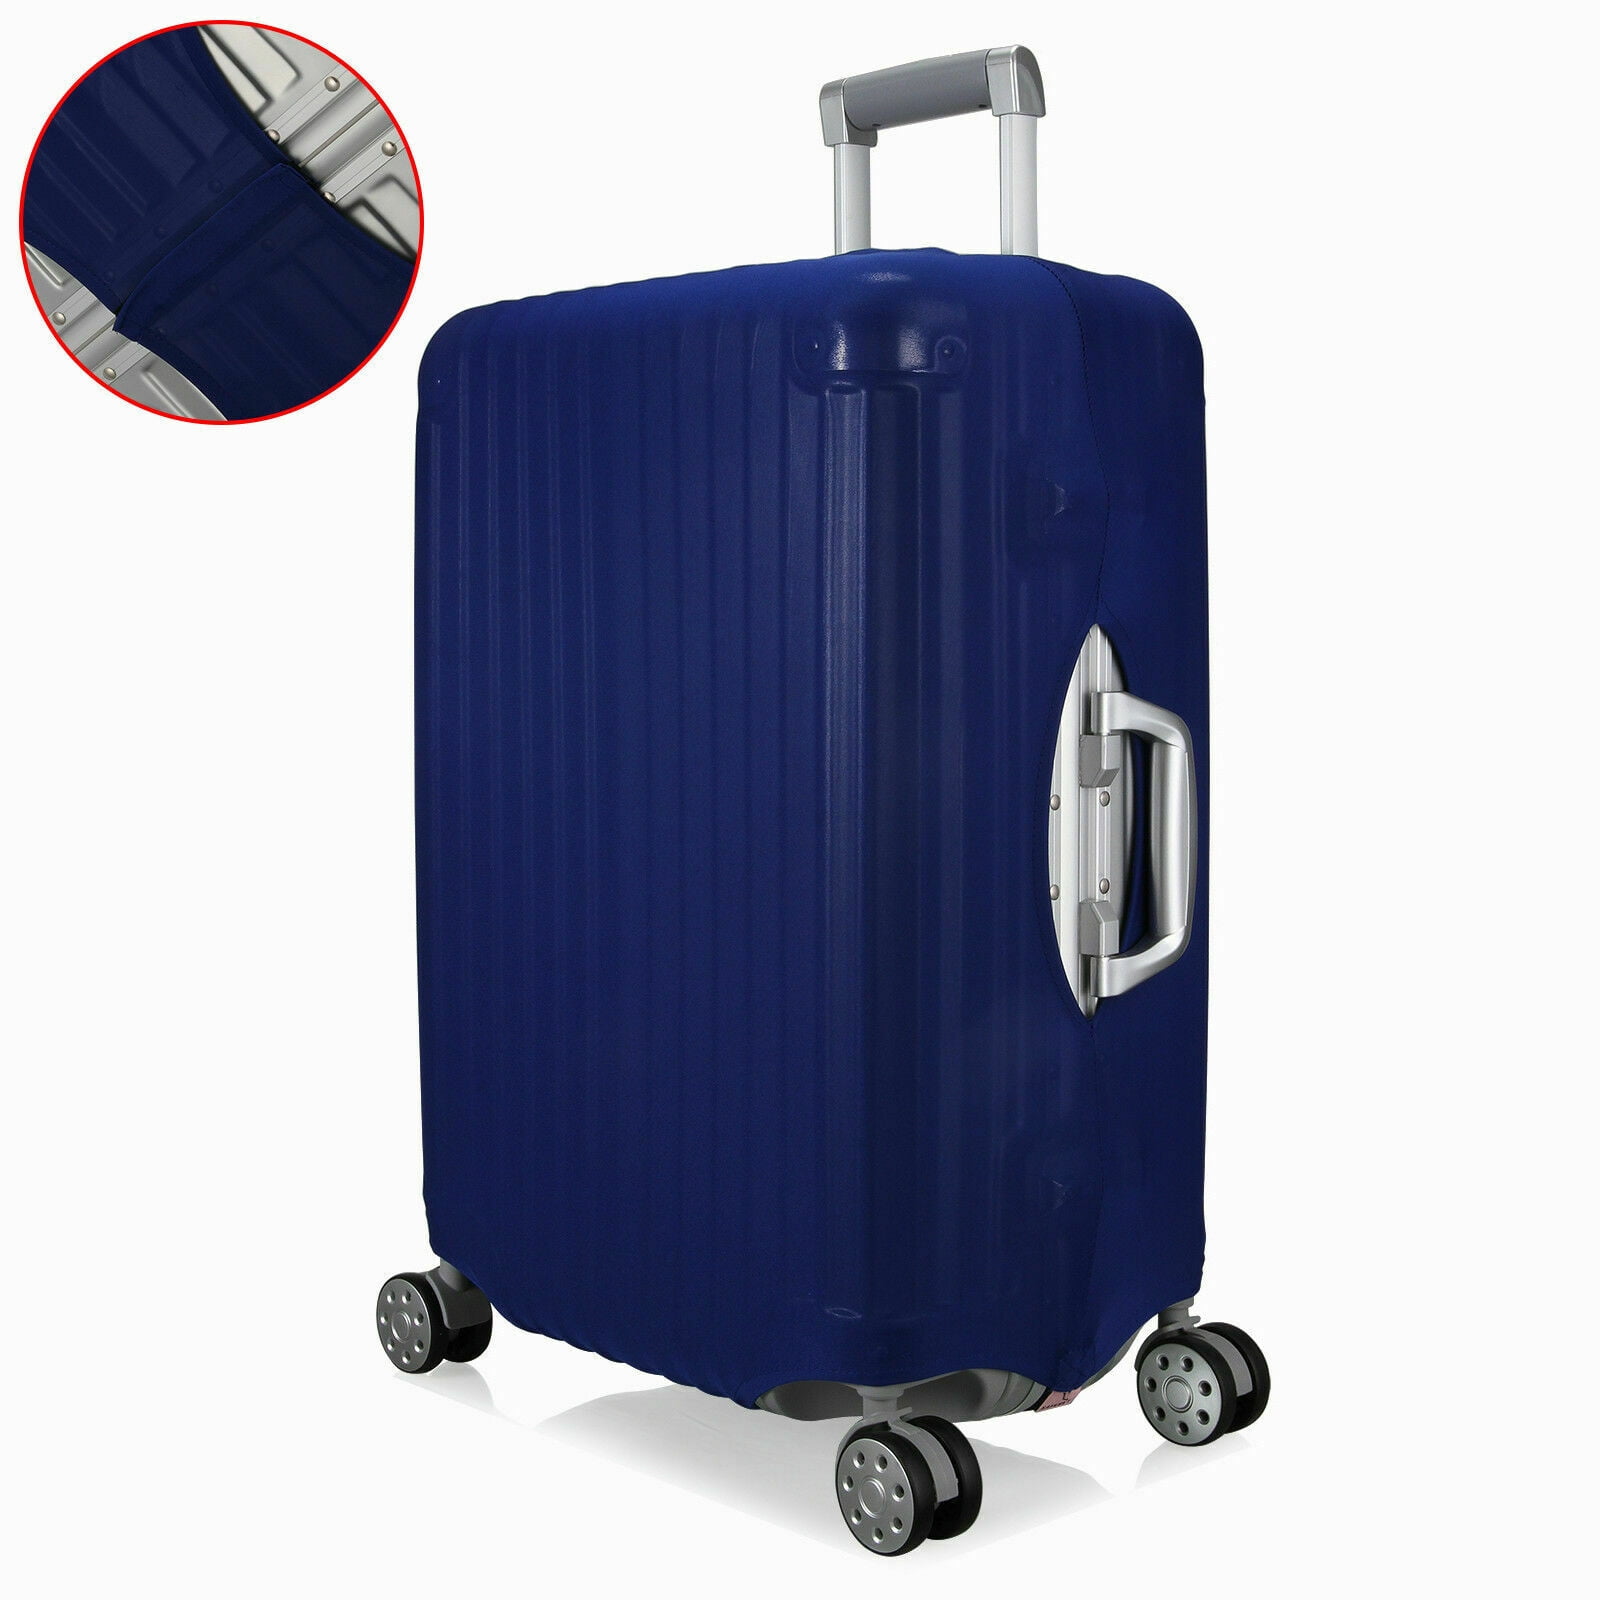 Luggage Cover Travel Suitcase Protector Midnight Blue Abstract Lines  Suitcase Cover,Elastic Luggage Protector for 26-28 Inch Luggage,Modern  Geometric